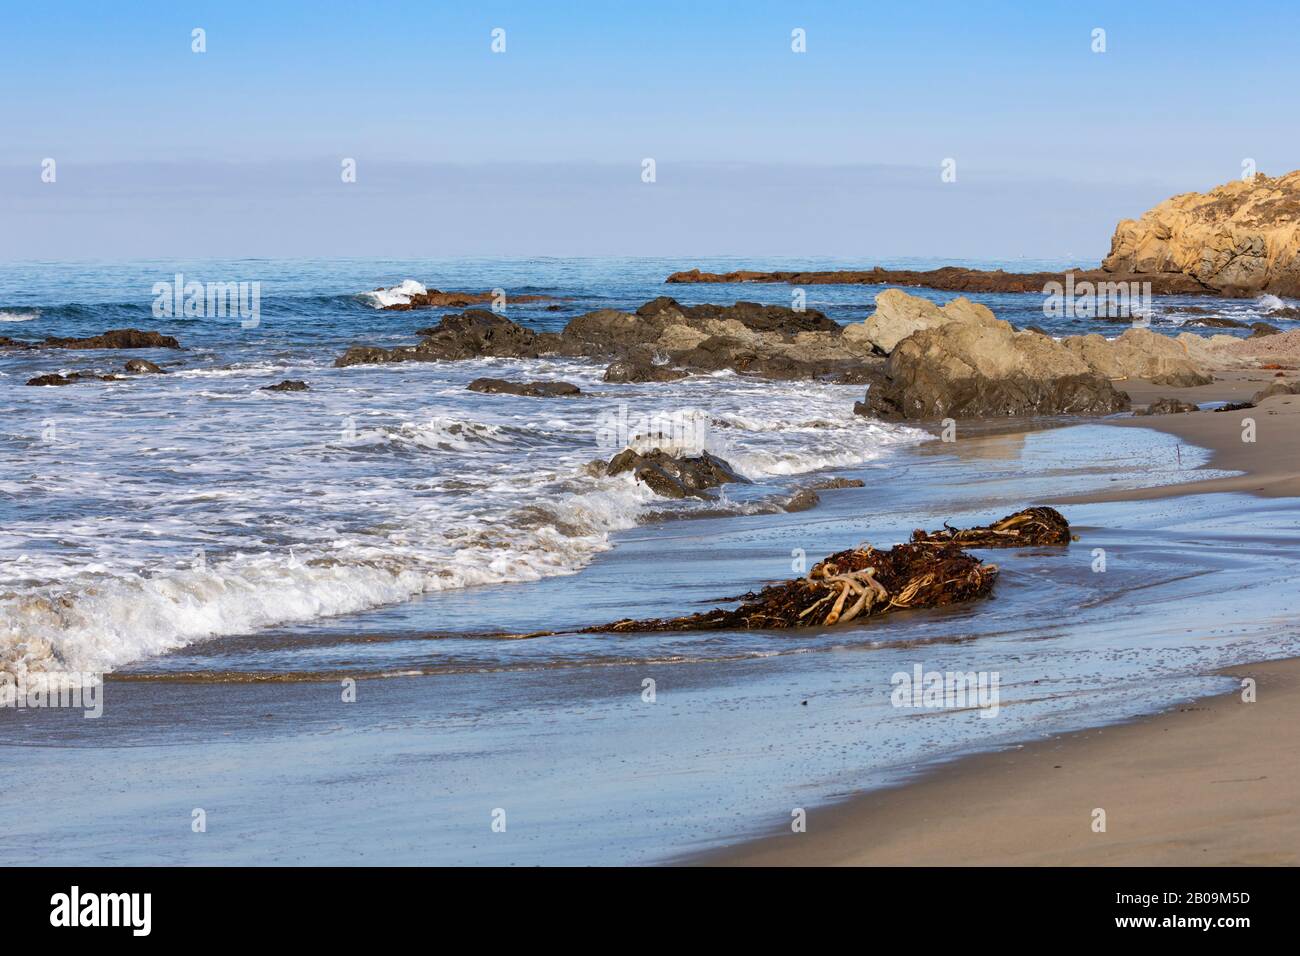 Beach at Cambria on the Pacific Coast Highway, California, United States of America Stock Photo